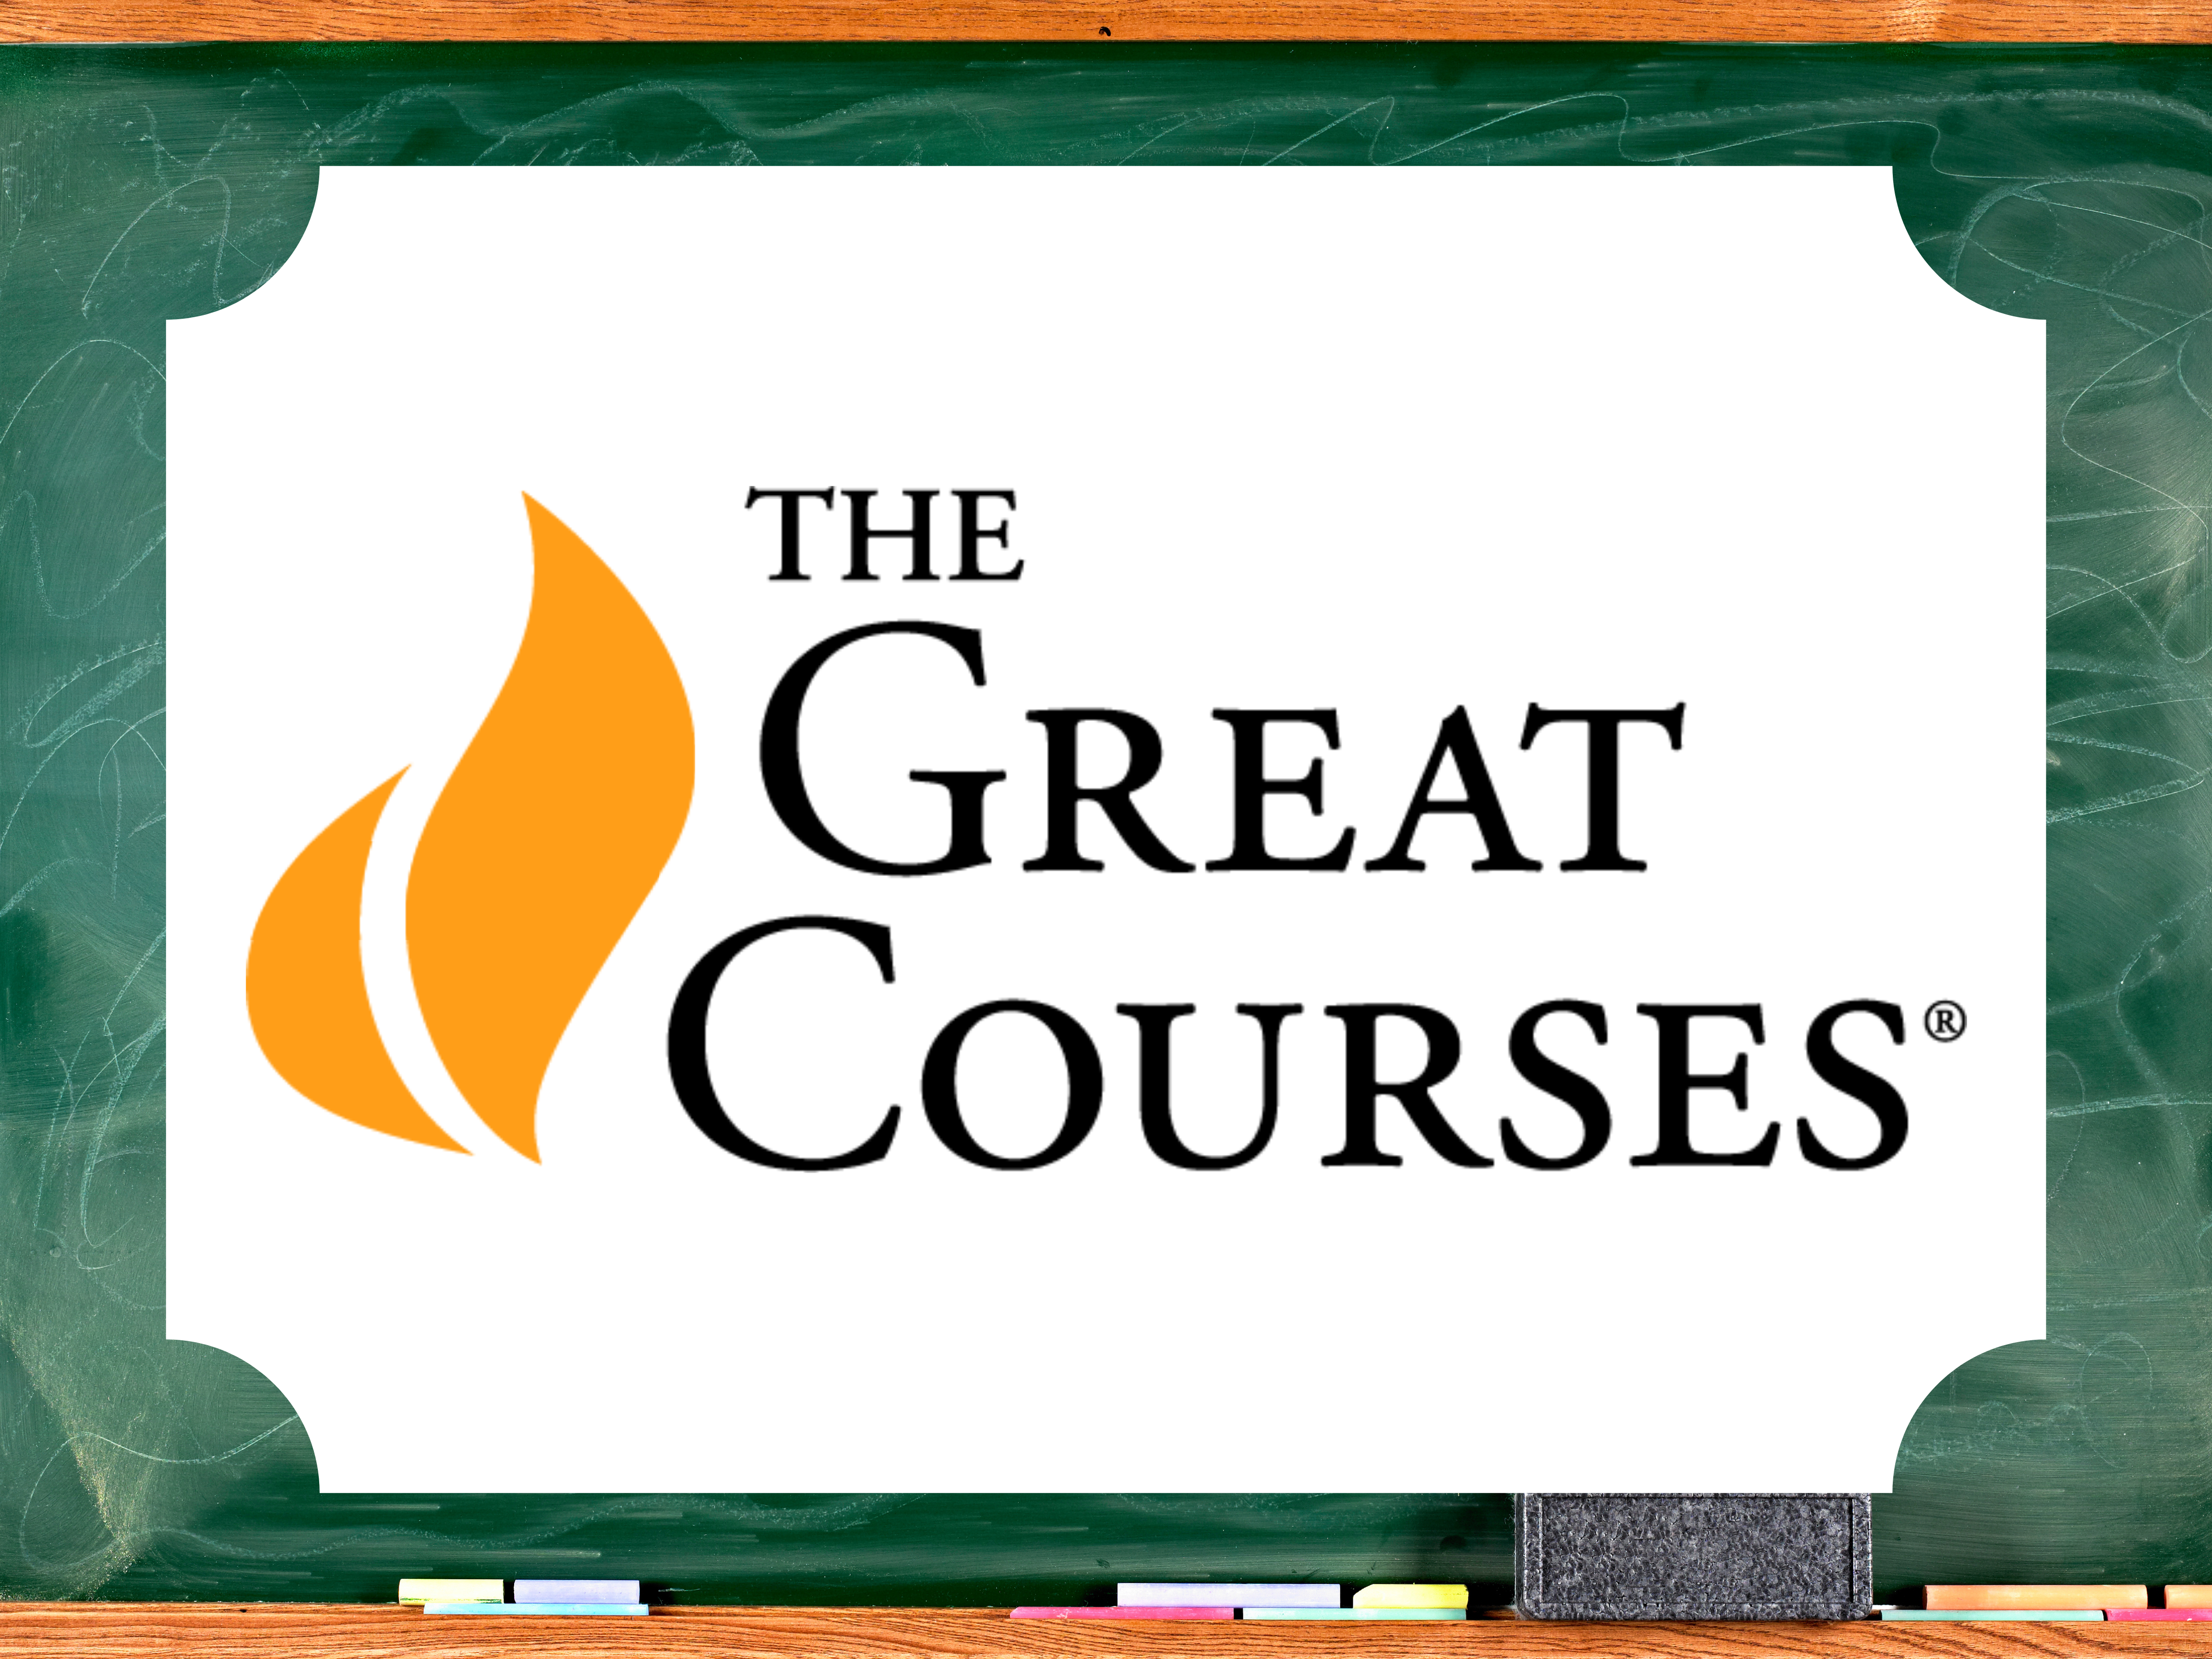 Great Courses